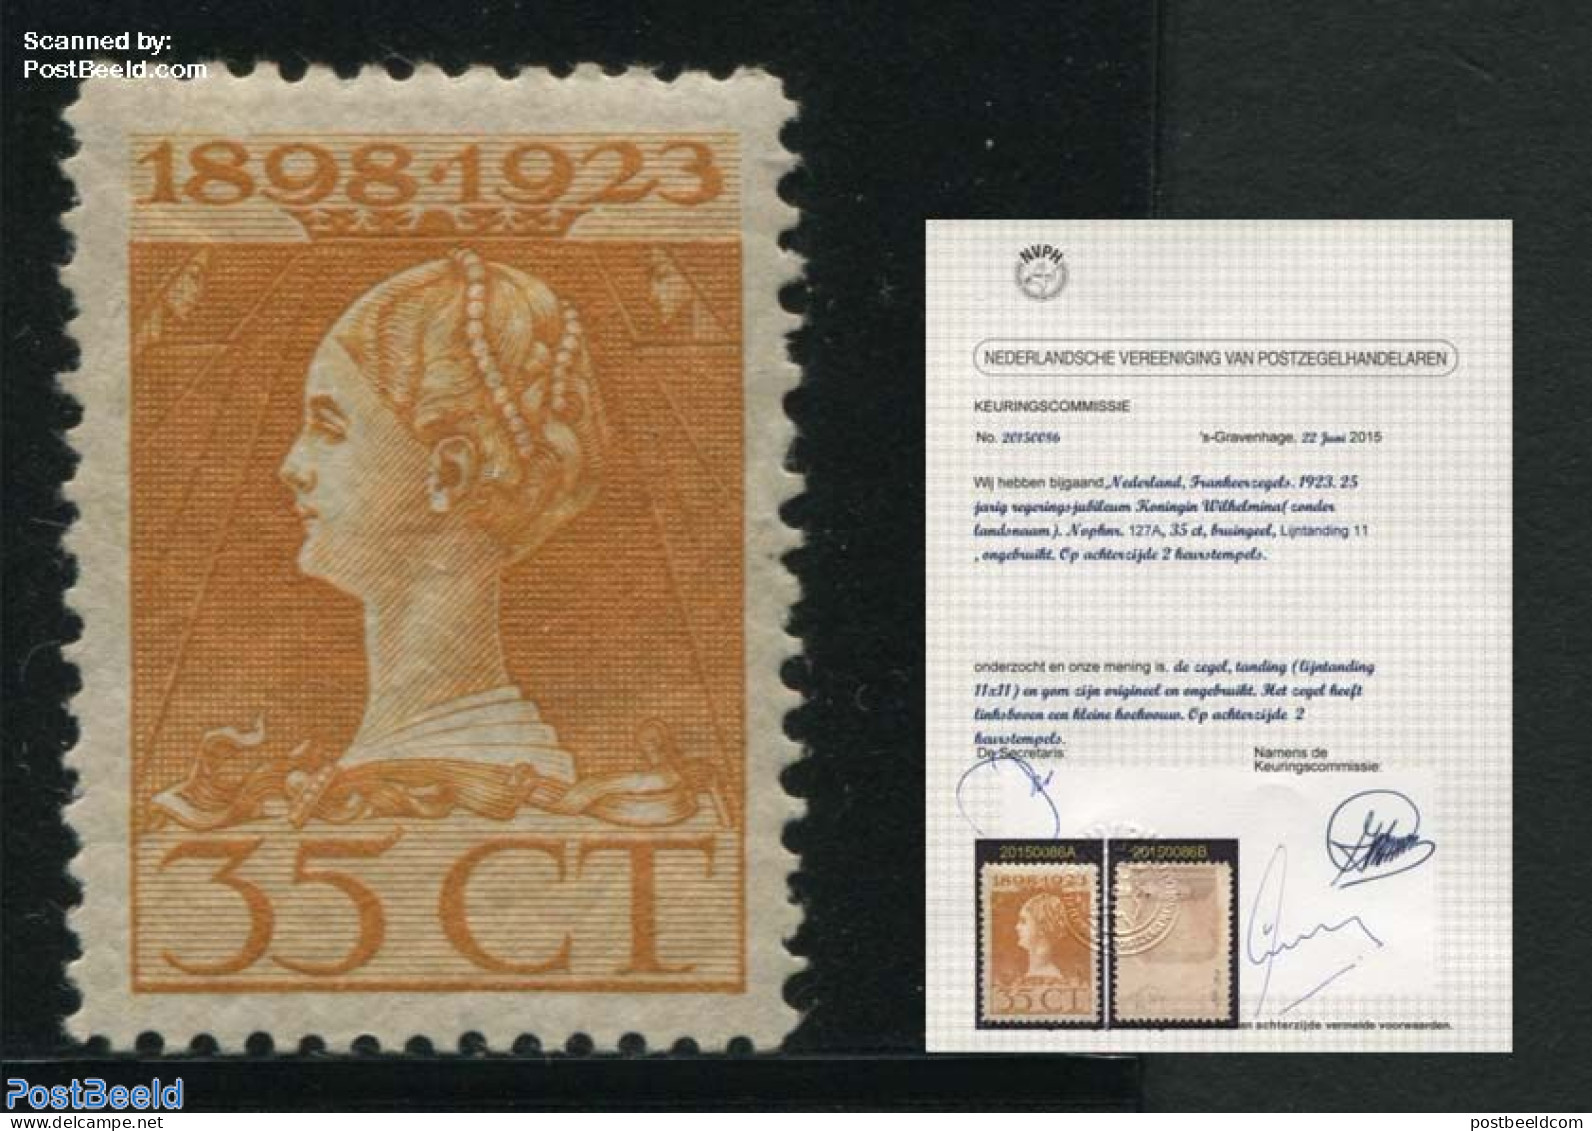 Netherlands 1923 Silver Jubilee 35c, Perf. 11. Very Rare Stamp With NVPH Certificate, Very Light Tiny Folding In Left,.. - Unused Stamps